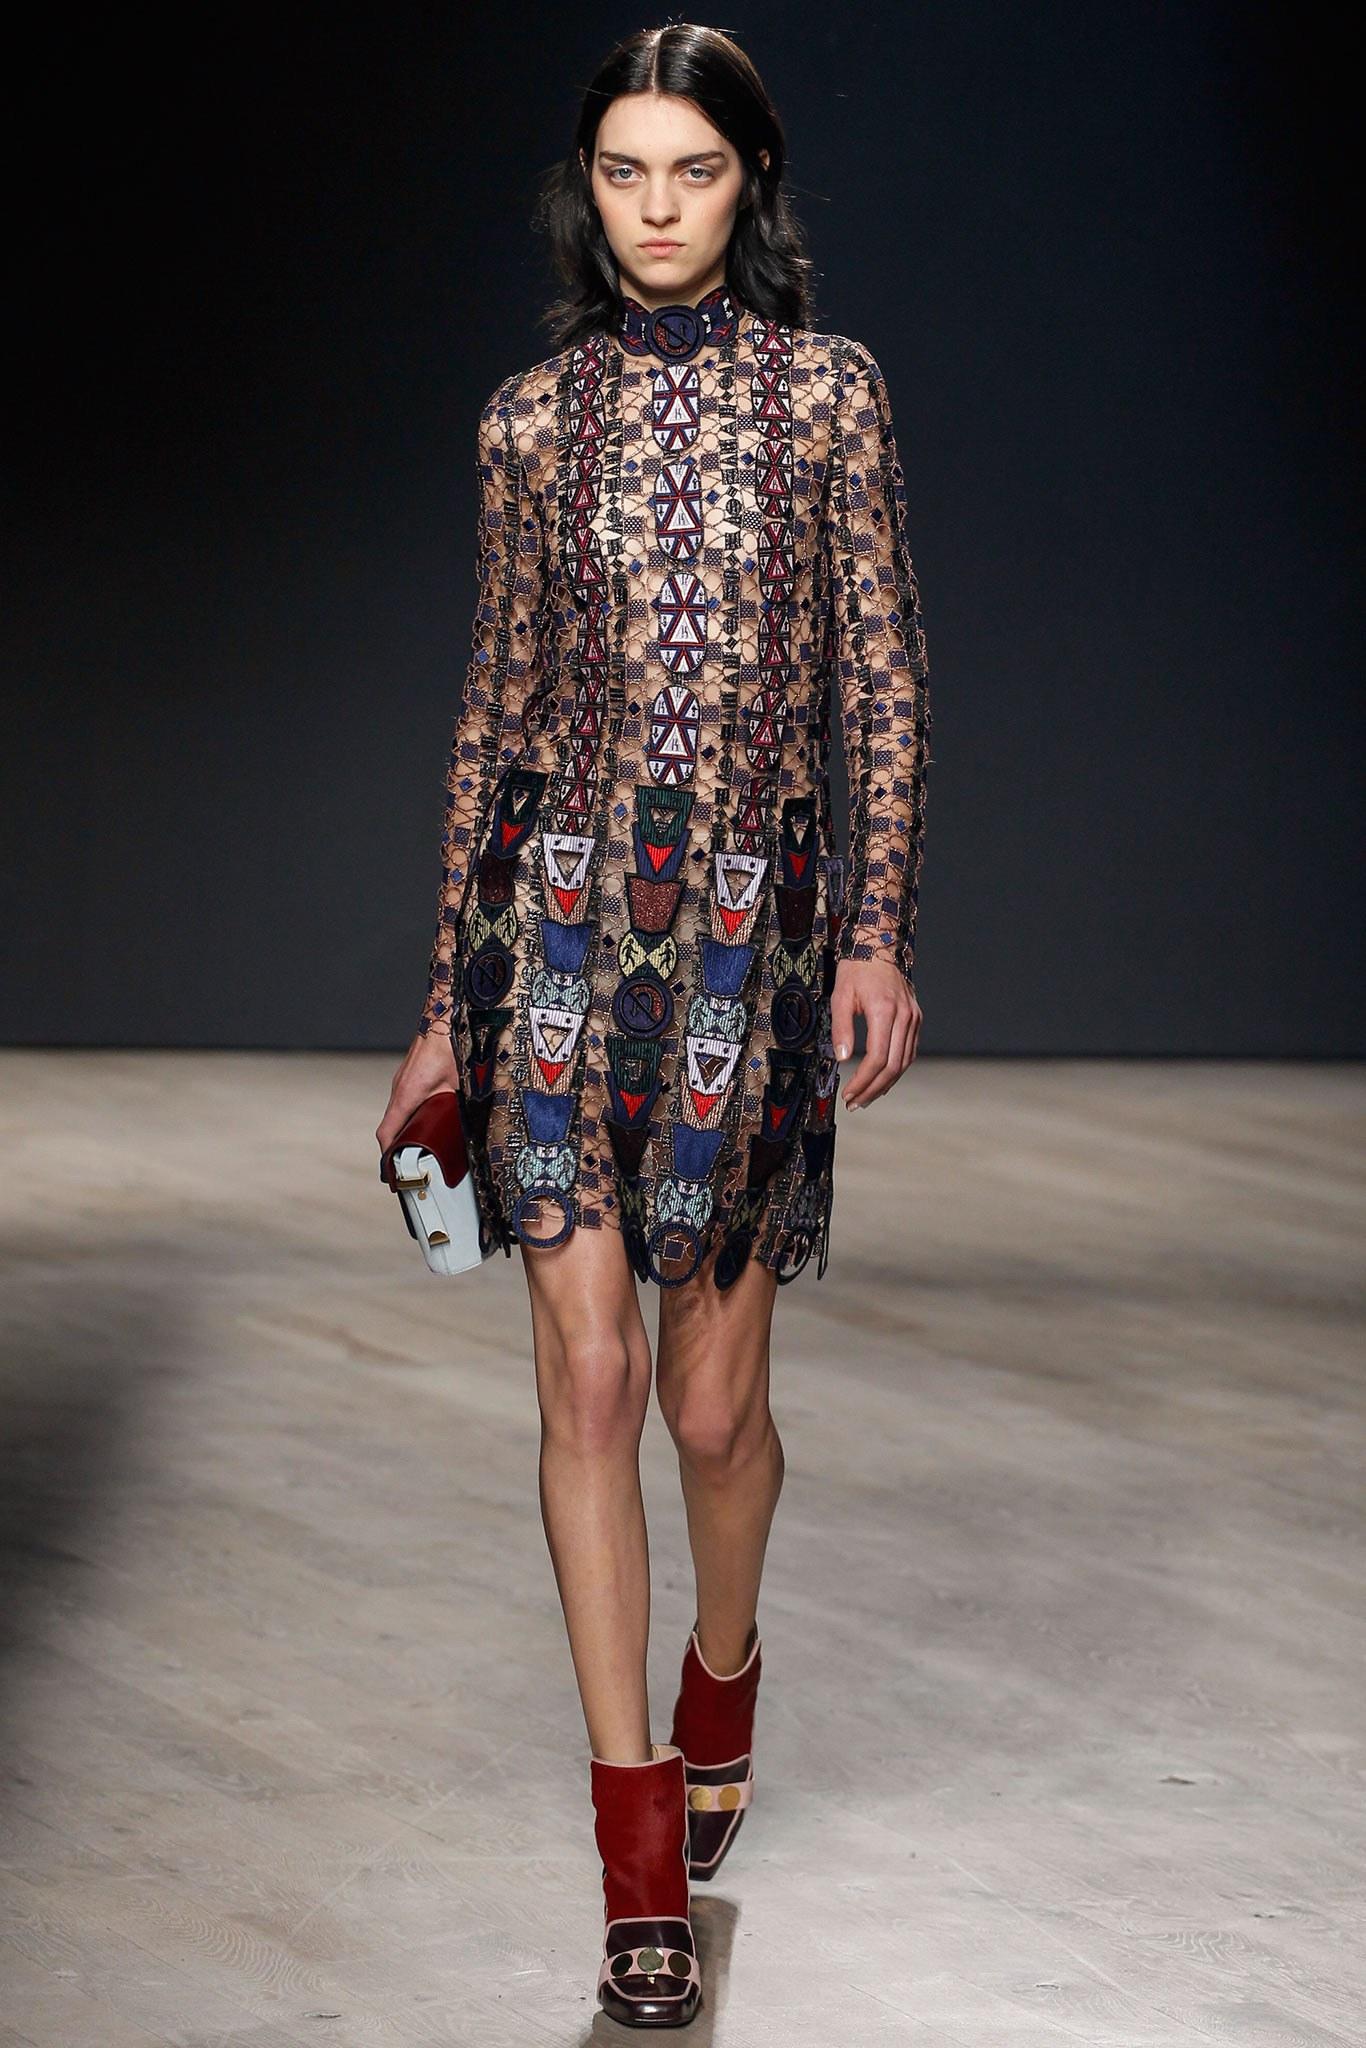 Mary Katrantzou Fall 2014 Navy and Gold Pincop Guipure Lace Dress.  Original retail $14,305 USD at Moda Operandi. Long sleeve thick guipure lace dress in navy, purple, copper, pewter, plum, red, green, on a nude sheer mesh base.  Decorated with